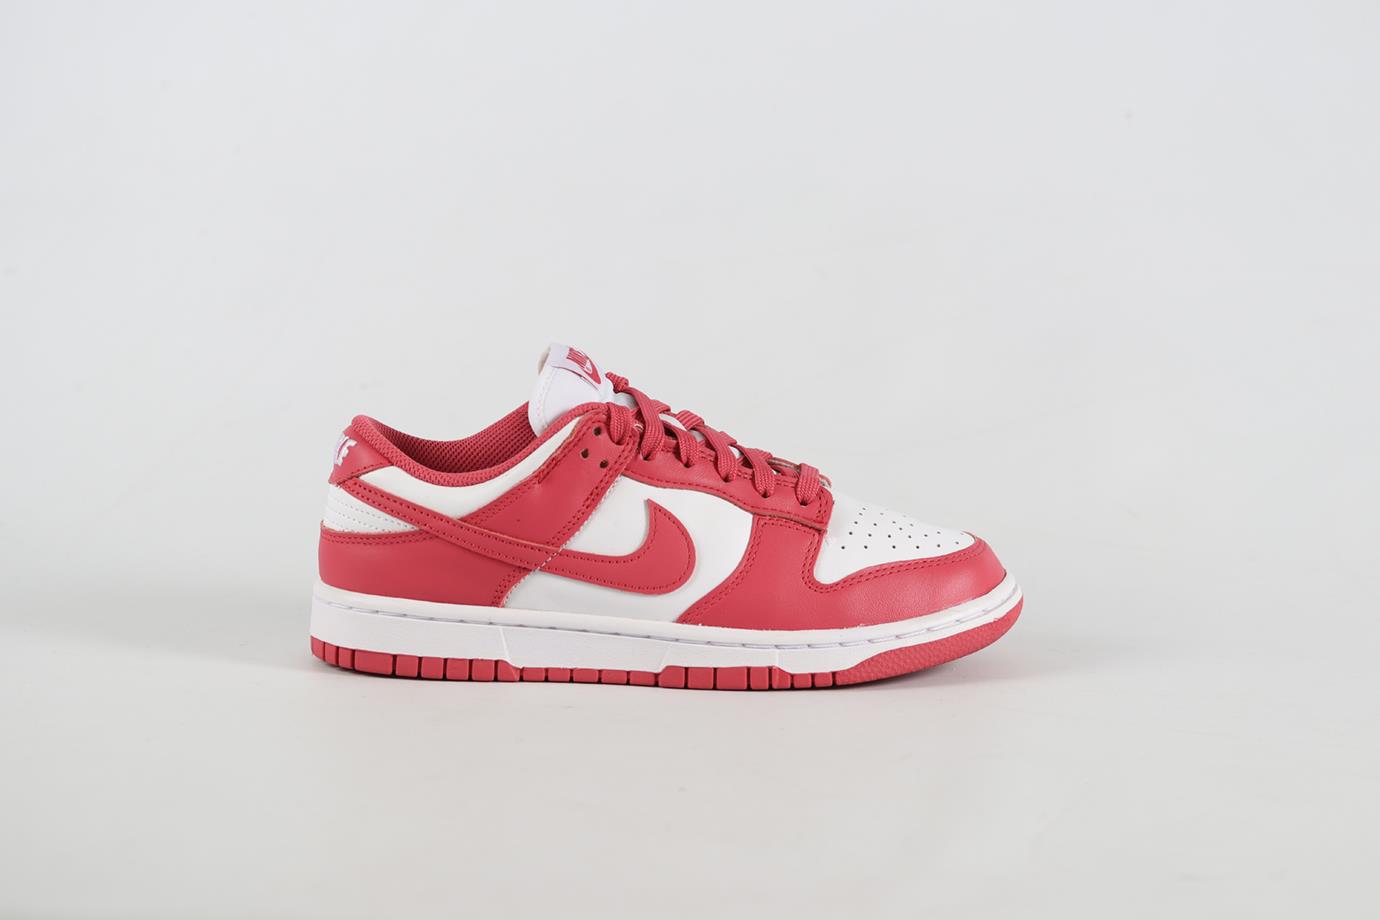 NIKE DUNK LOW ARCHEO PINK LEATHER SNEAKERS EU 39 UK 5.5 US 8